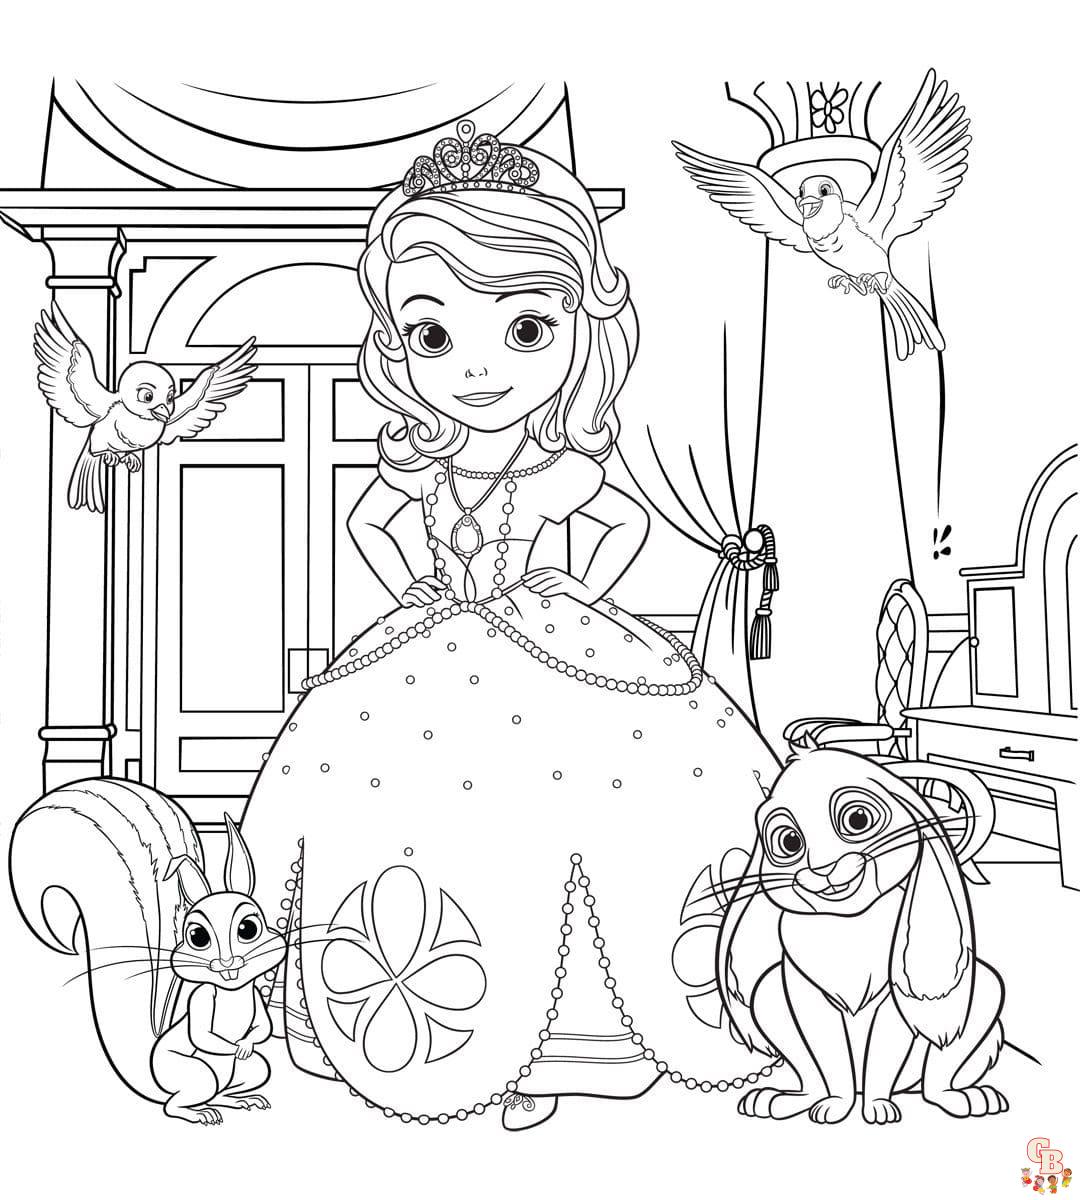 Find the best sofia the first coloring pages on